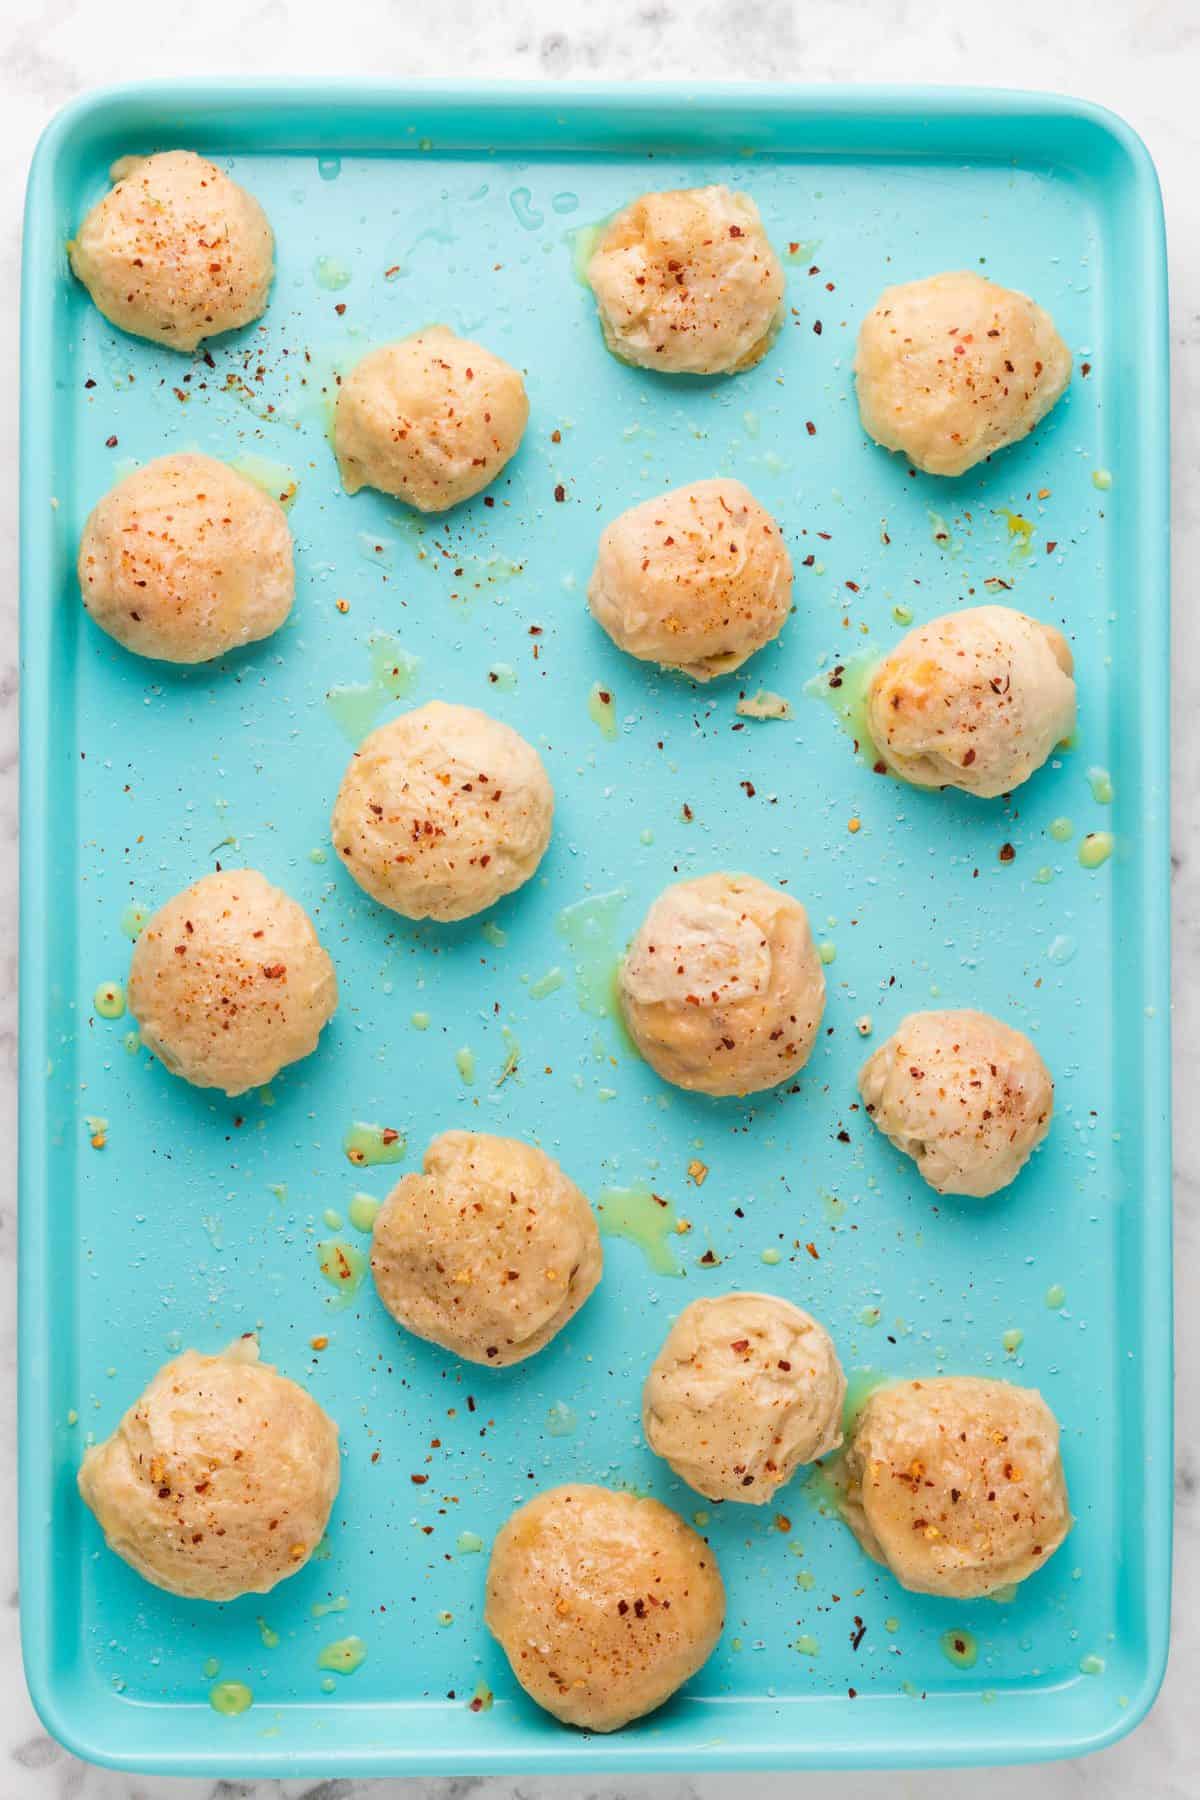 placing the boiled pretzel balls on a teal baking sheet and brushing with the melted butter mixture